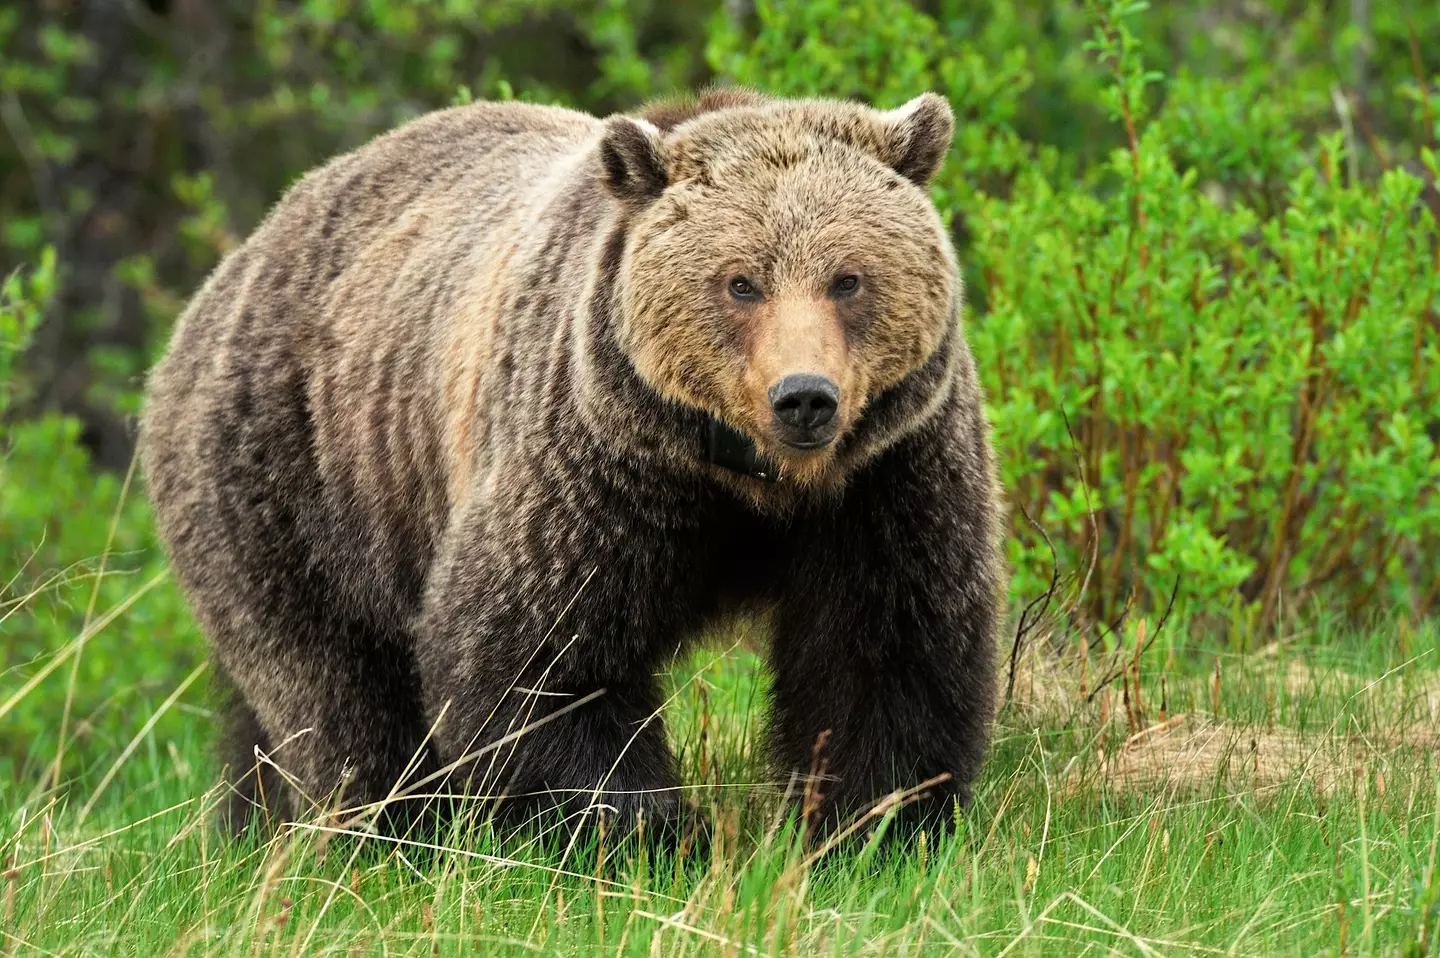 If you see a grizzly bear heading for you don't run, curl up, protect your vital organs and cover the back of your neck.